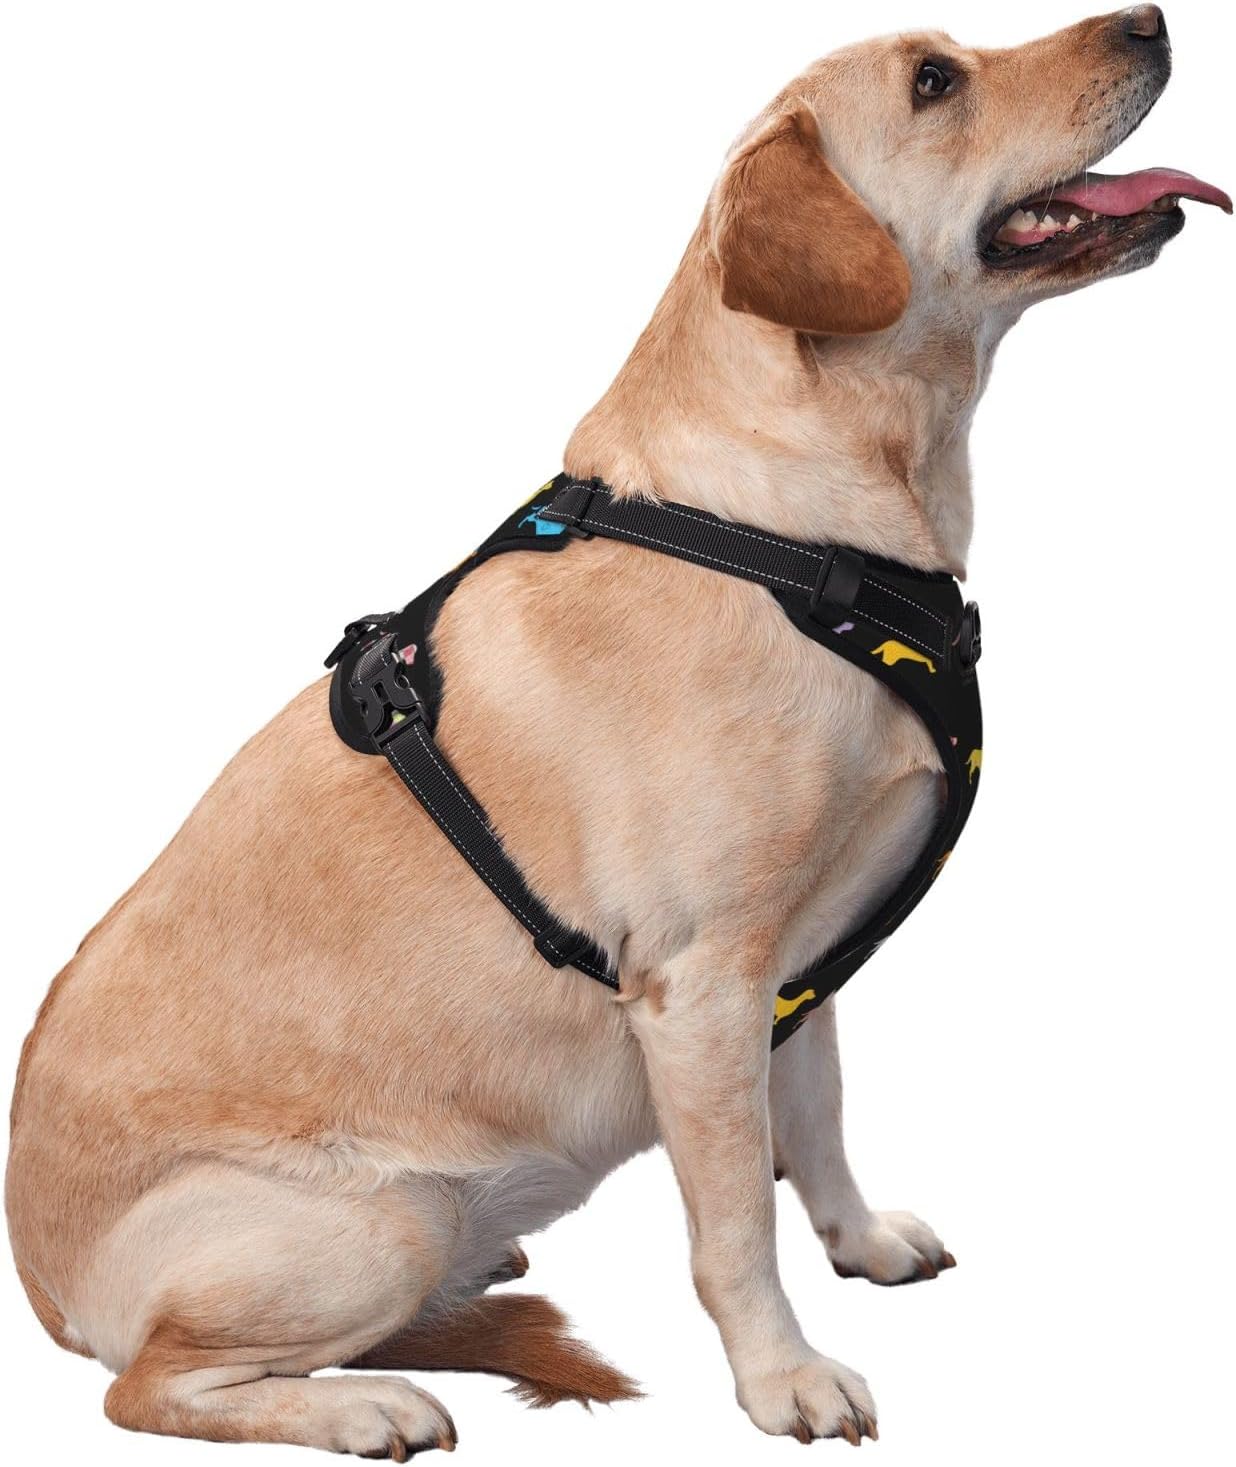 Waldeal Cute Dachshund Dog Harness No Pull, Adjustable Dog Walking Chest Harness with 2 Leash Clips, Comfort Soft Dog Vest, Reflective Front Body Harness, Size S Black